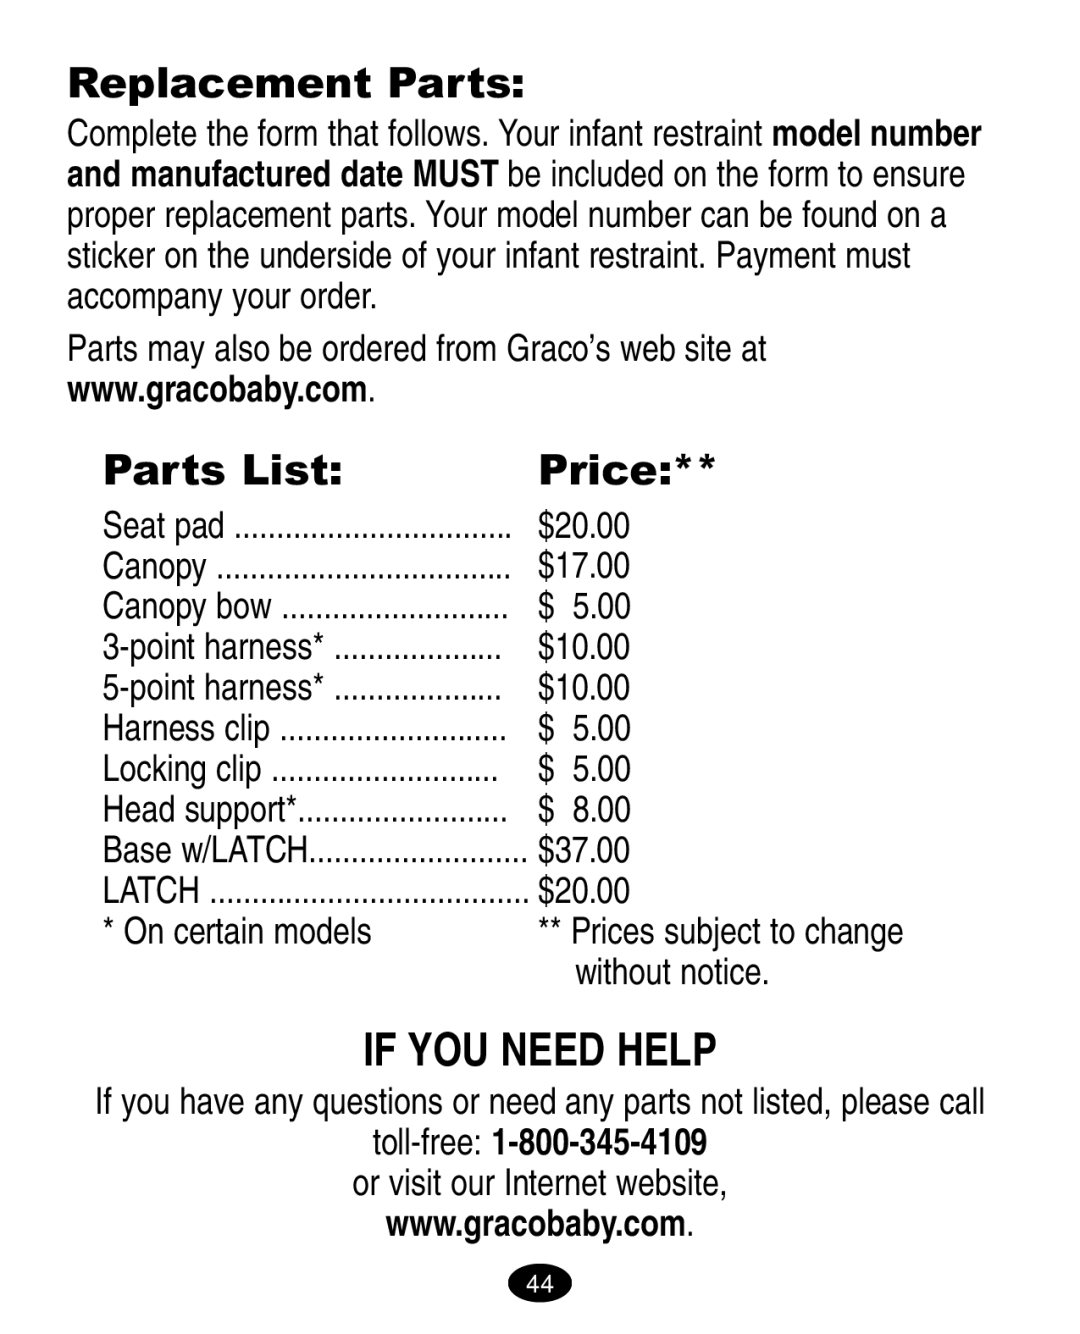 Graco ISPA010AB manual Replacement Parts, Parts List Price, On certain models, Toll-free1-800-345-4109 